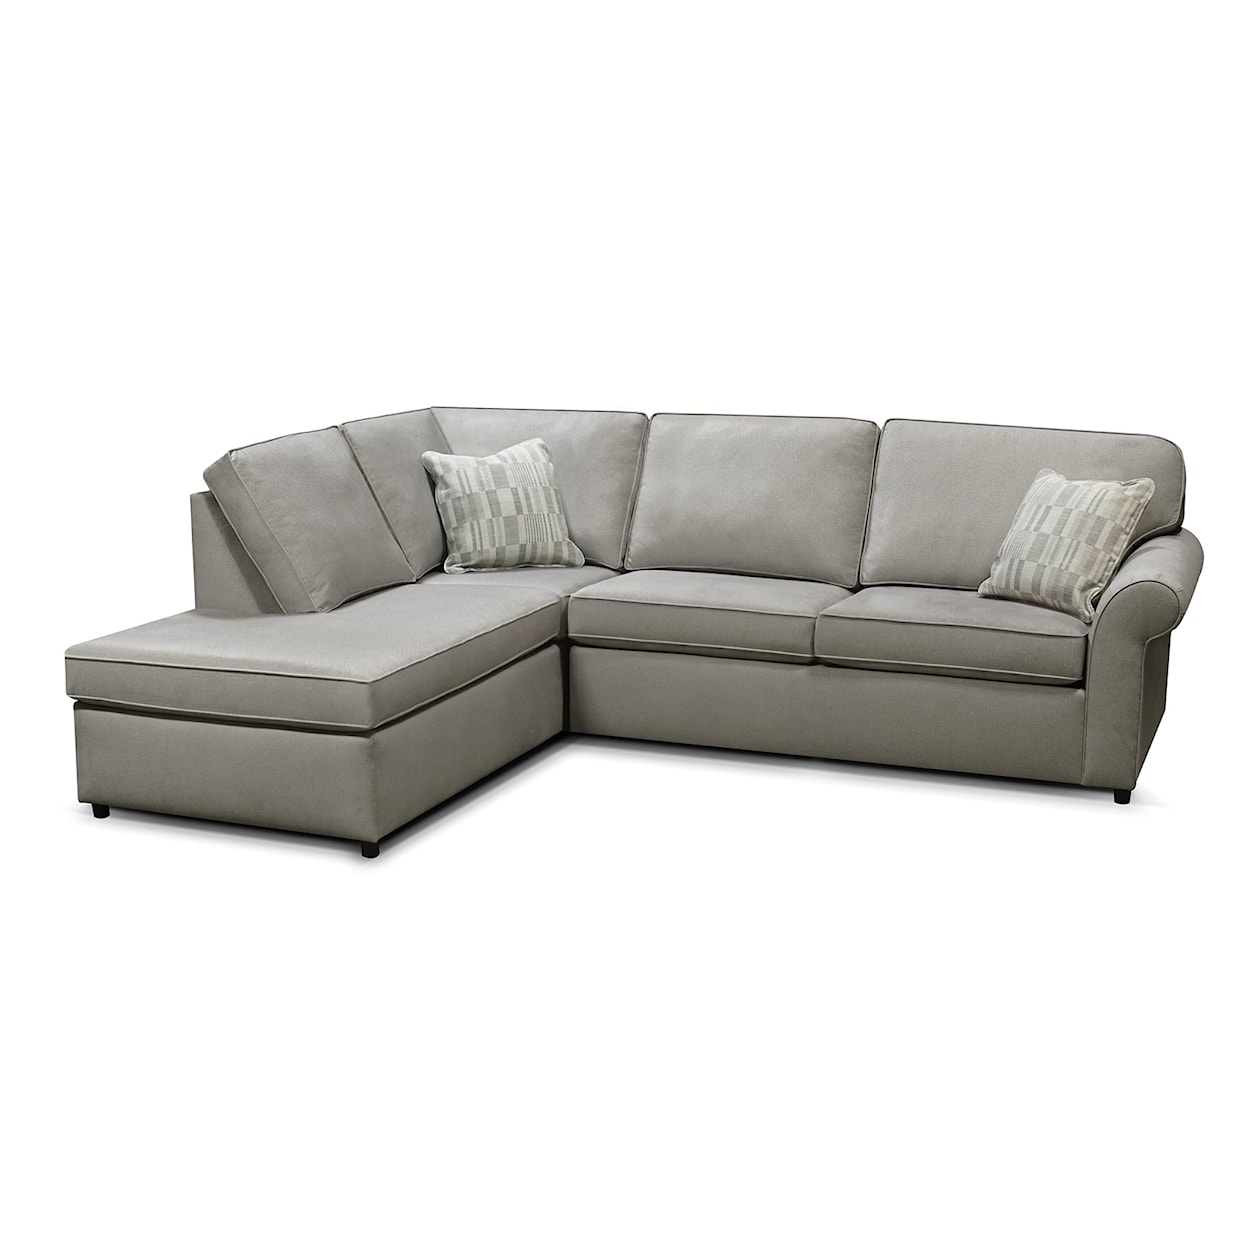 England 2450 Series L-Shaped Sectional